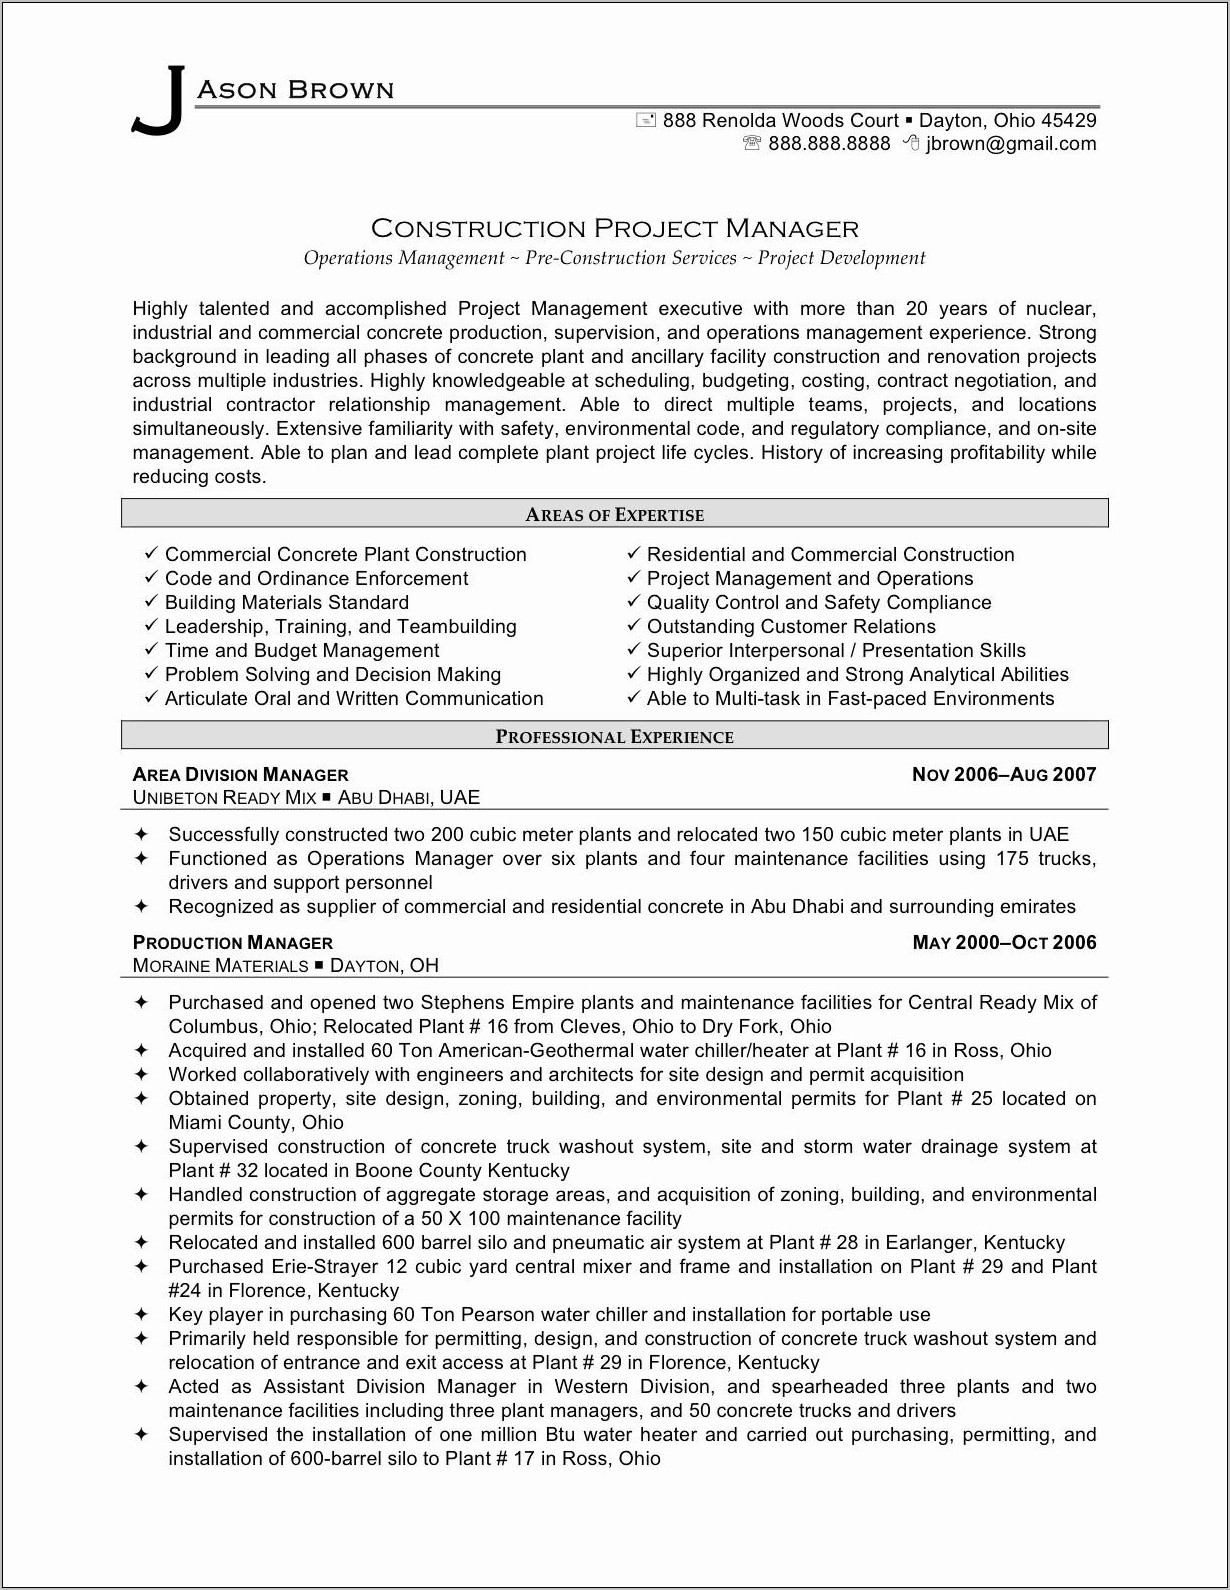 Resume Samples For Project Manager